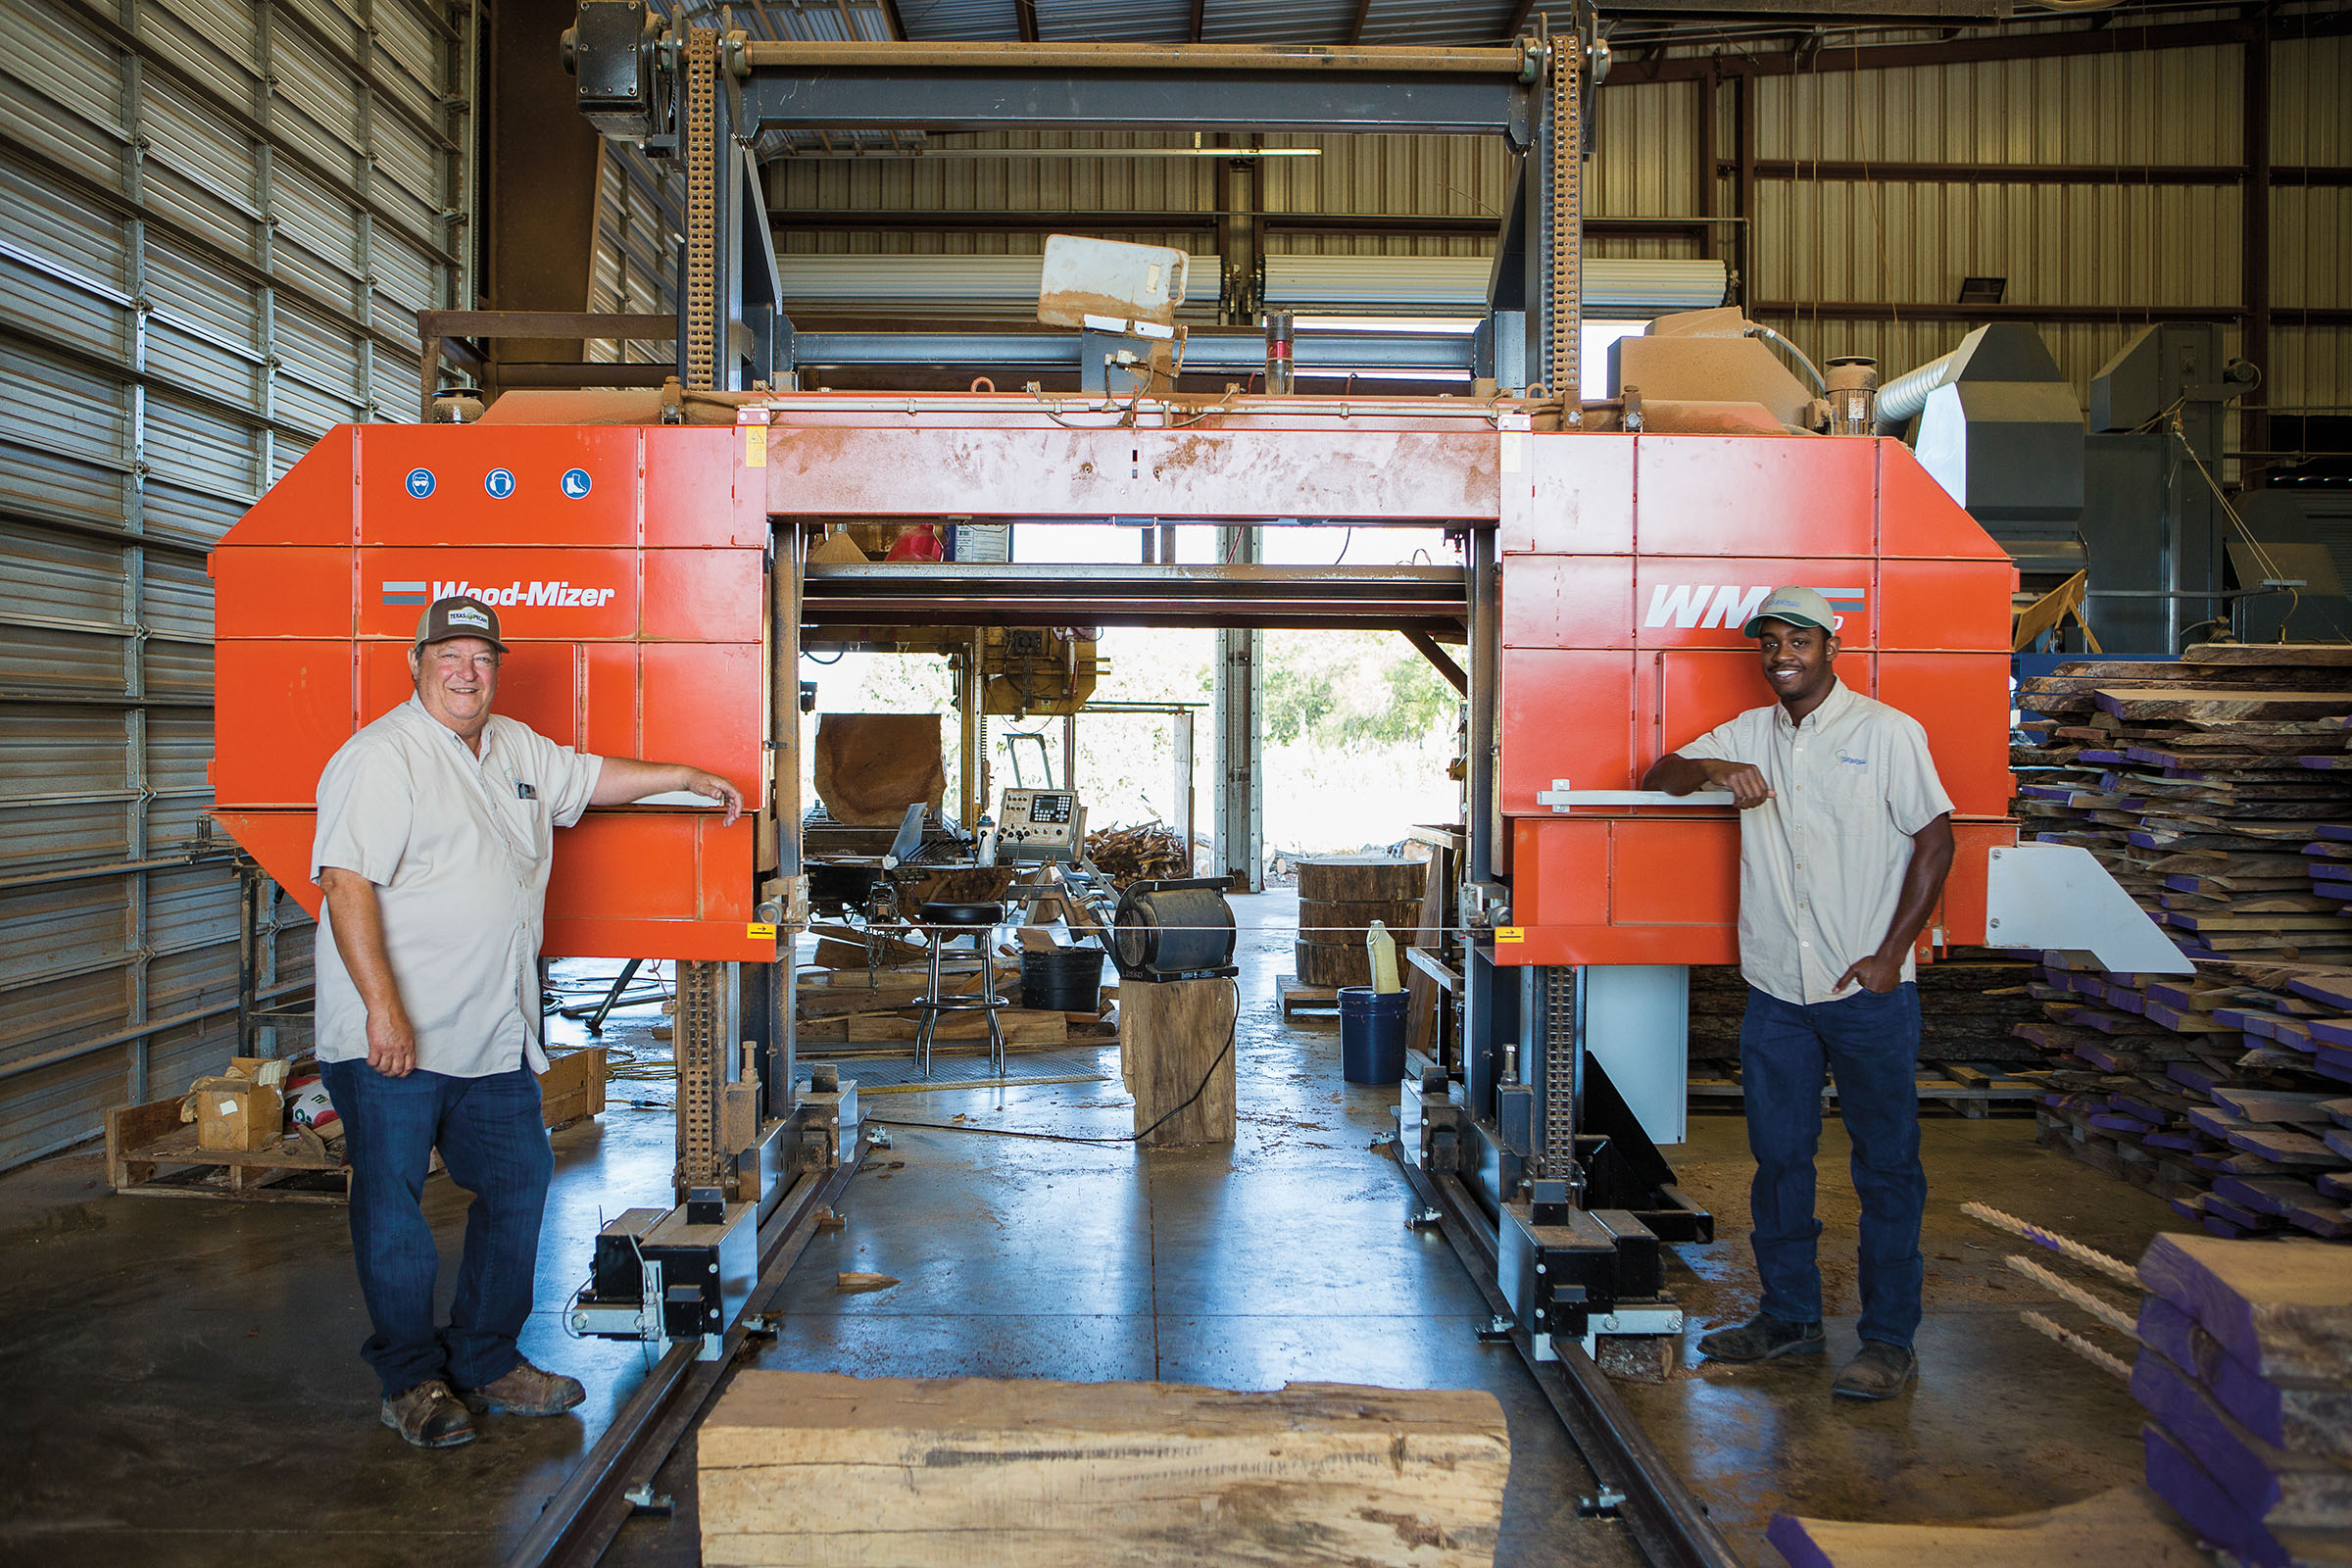 Two men stand in front of a bright orange machine labed "Wood-Mizer"